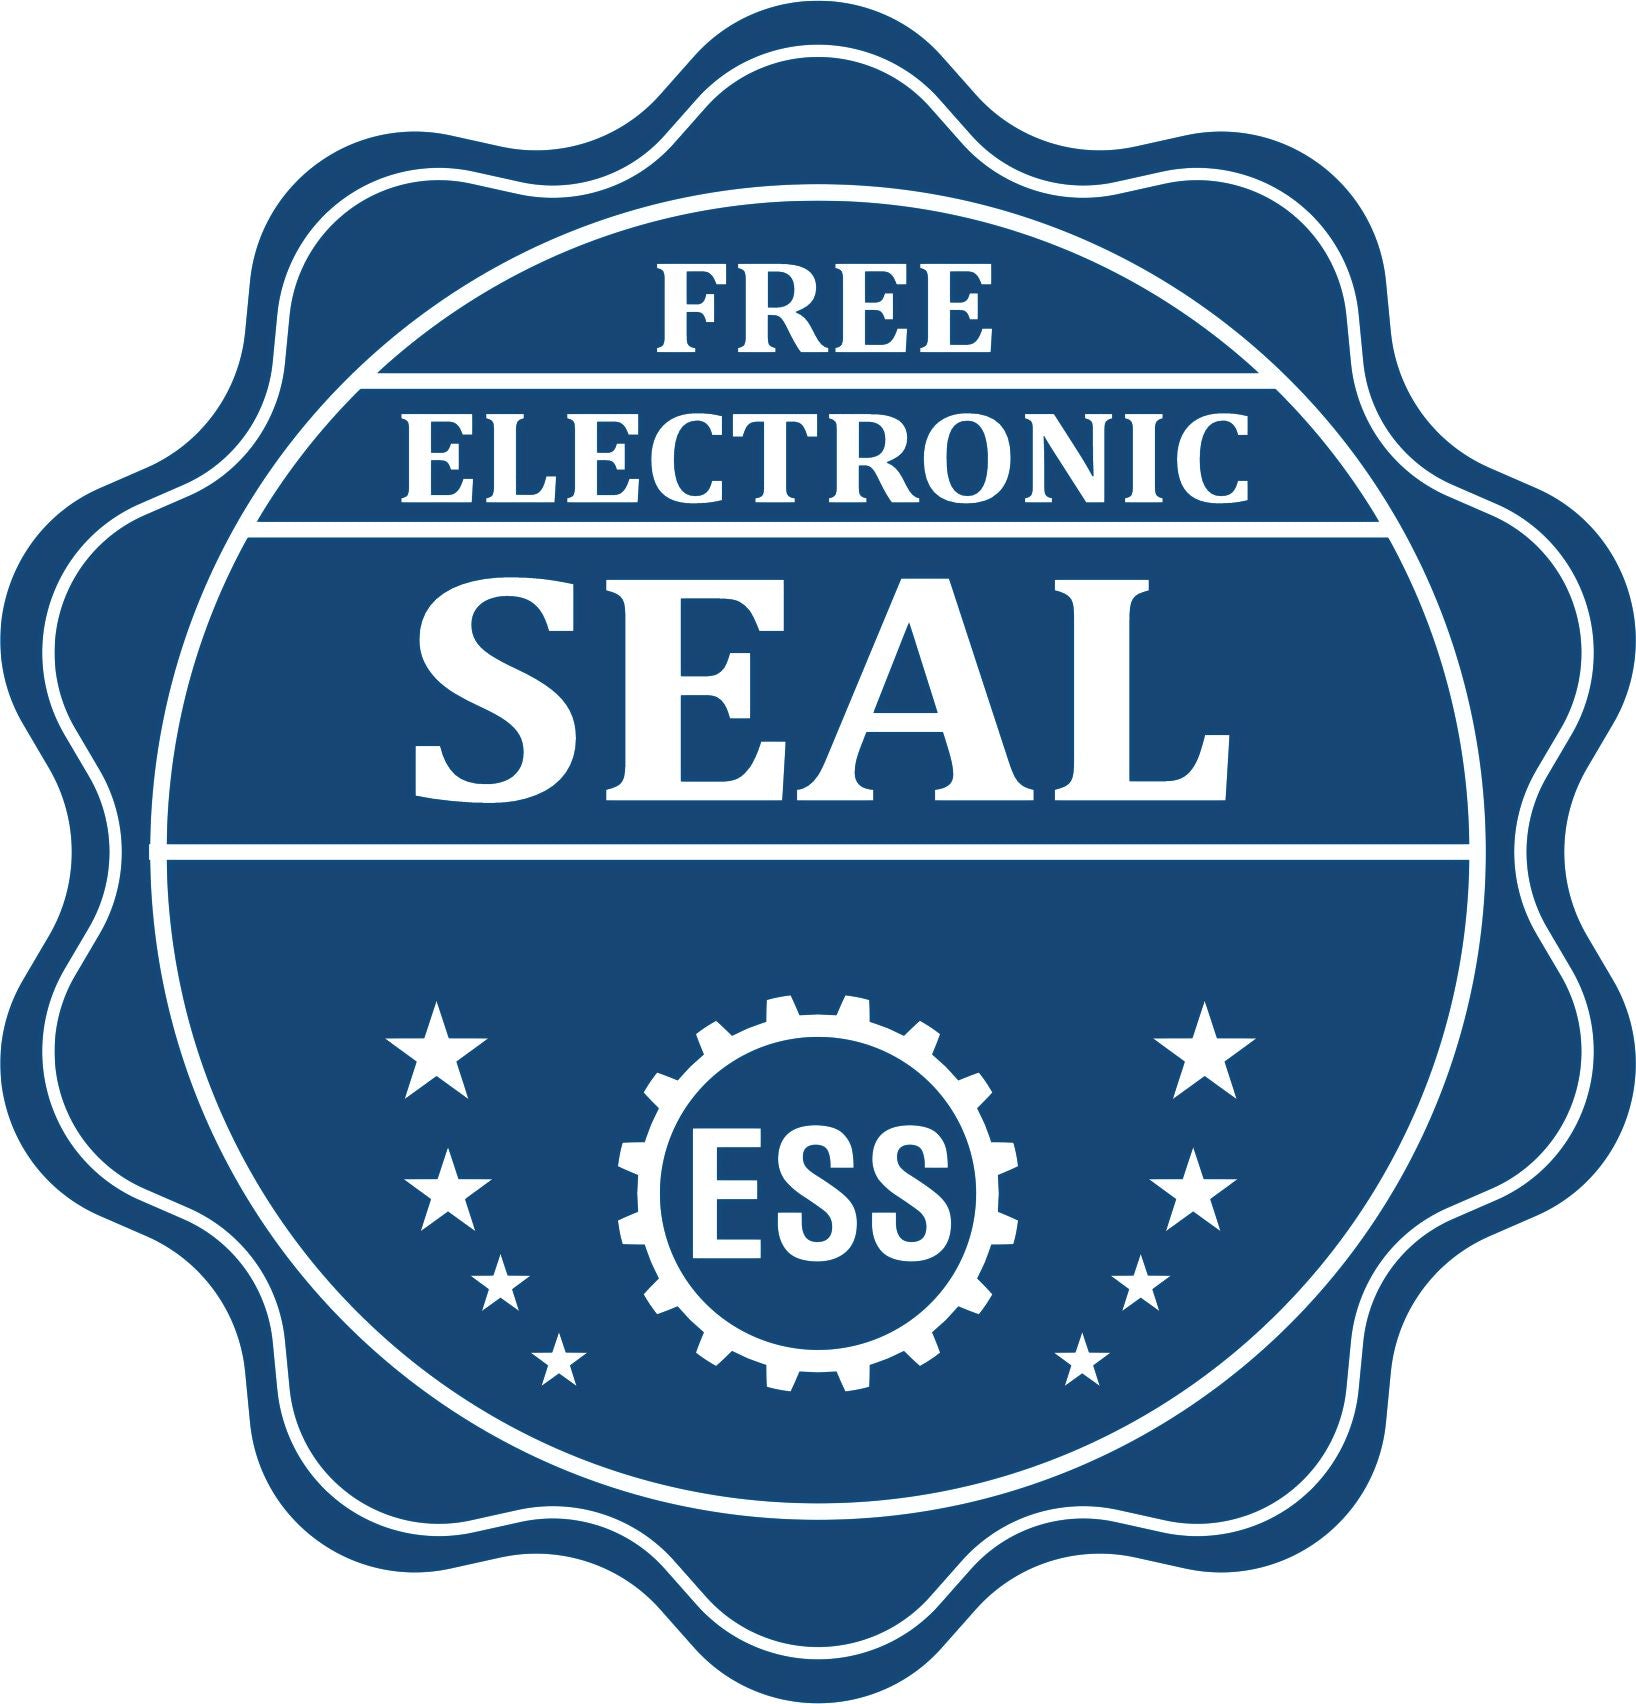 A badge showing a free electronic seal for the District of Columbia Soft Land Surveyor Embossing Seal with stars and the ESS gear on the emblem.